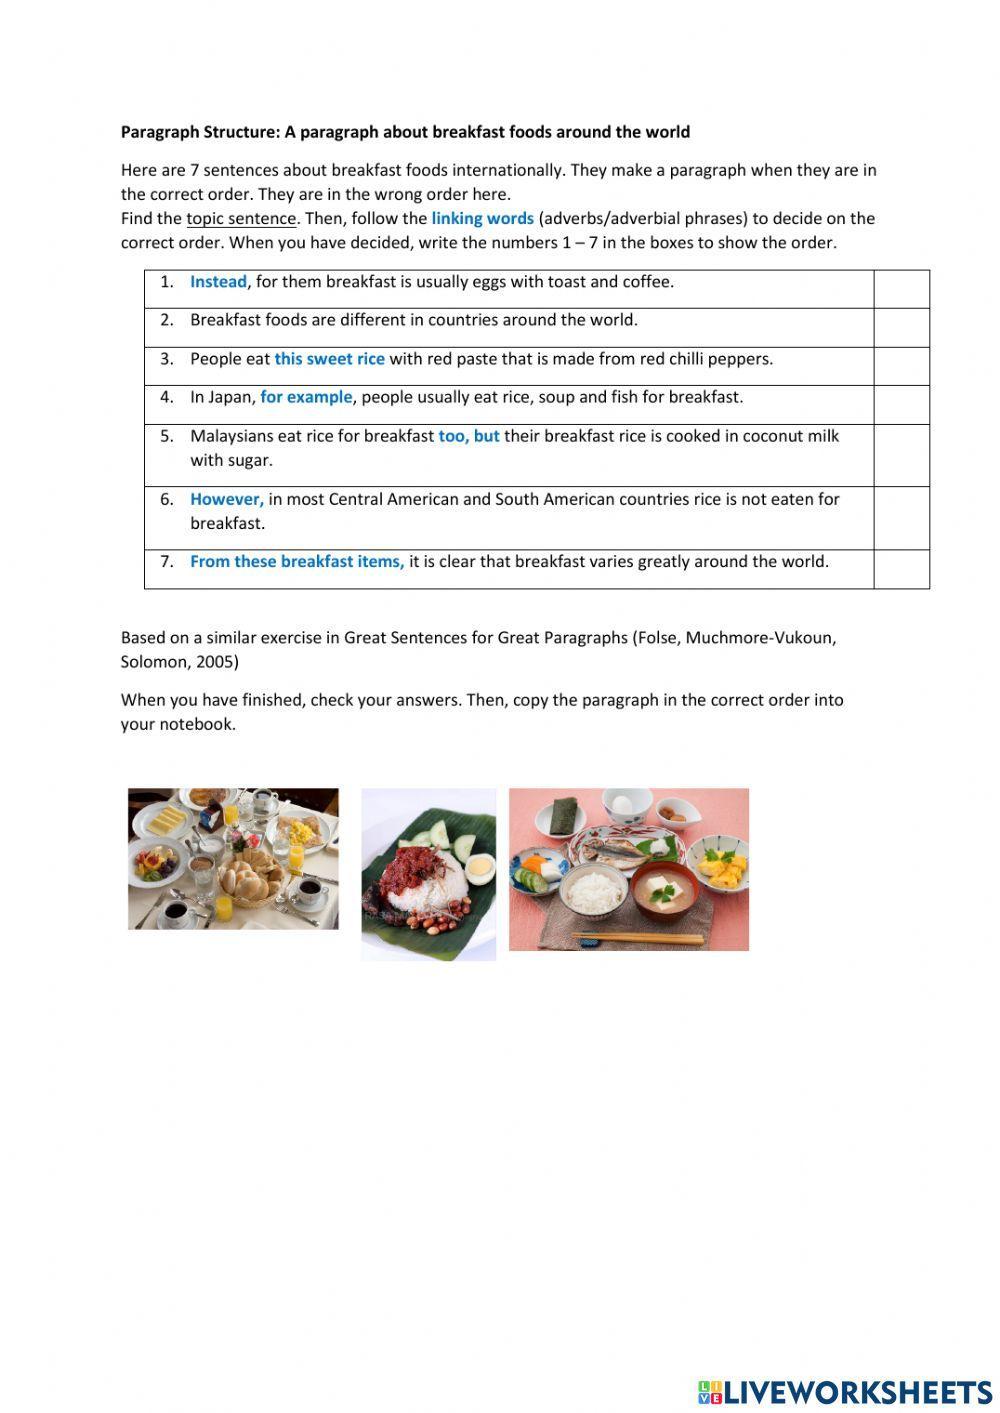 Paragraph Structure: Breakfast Foods